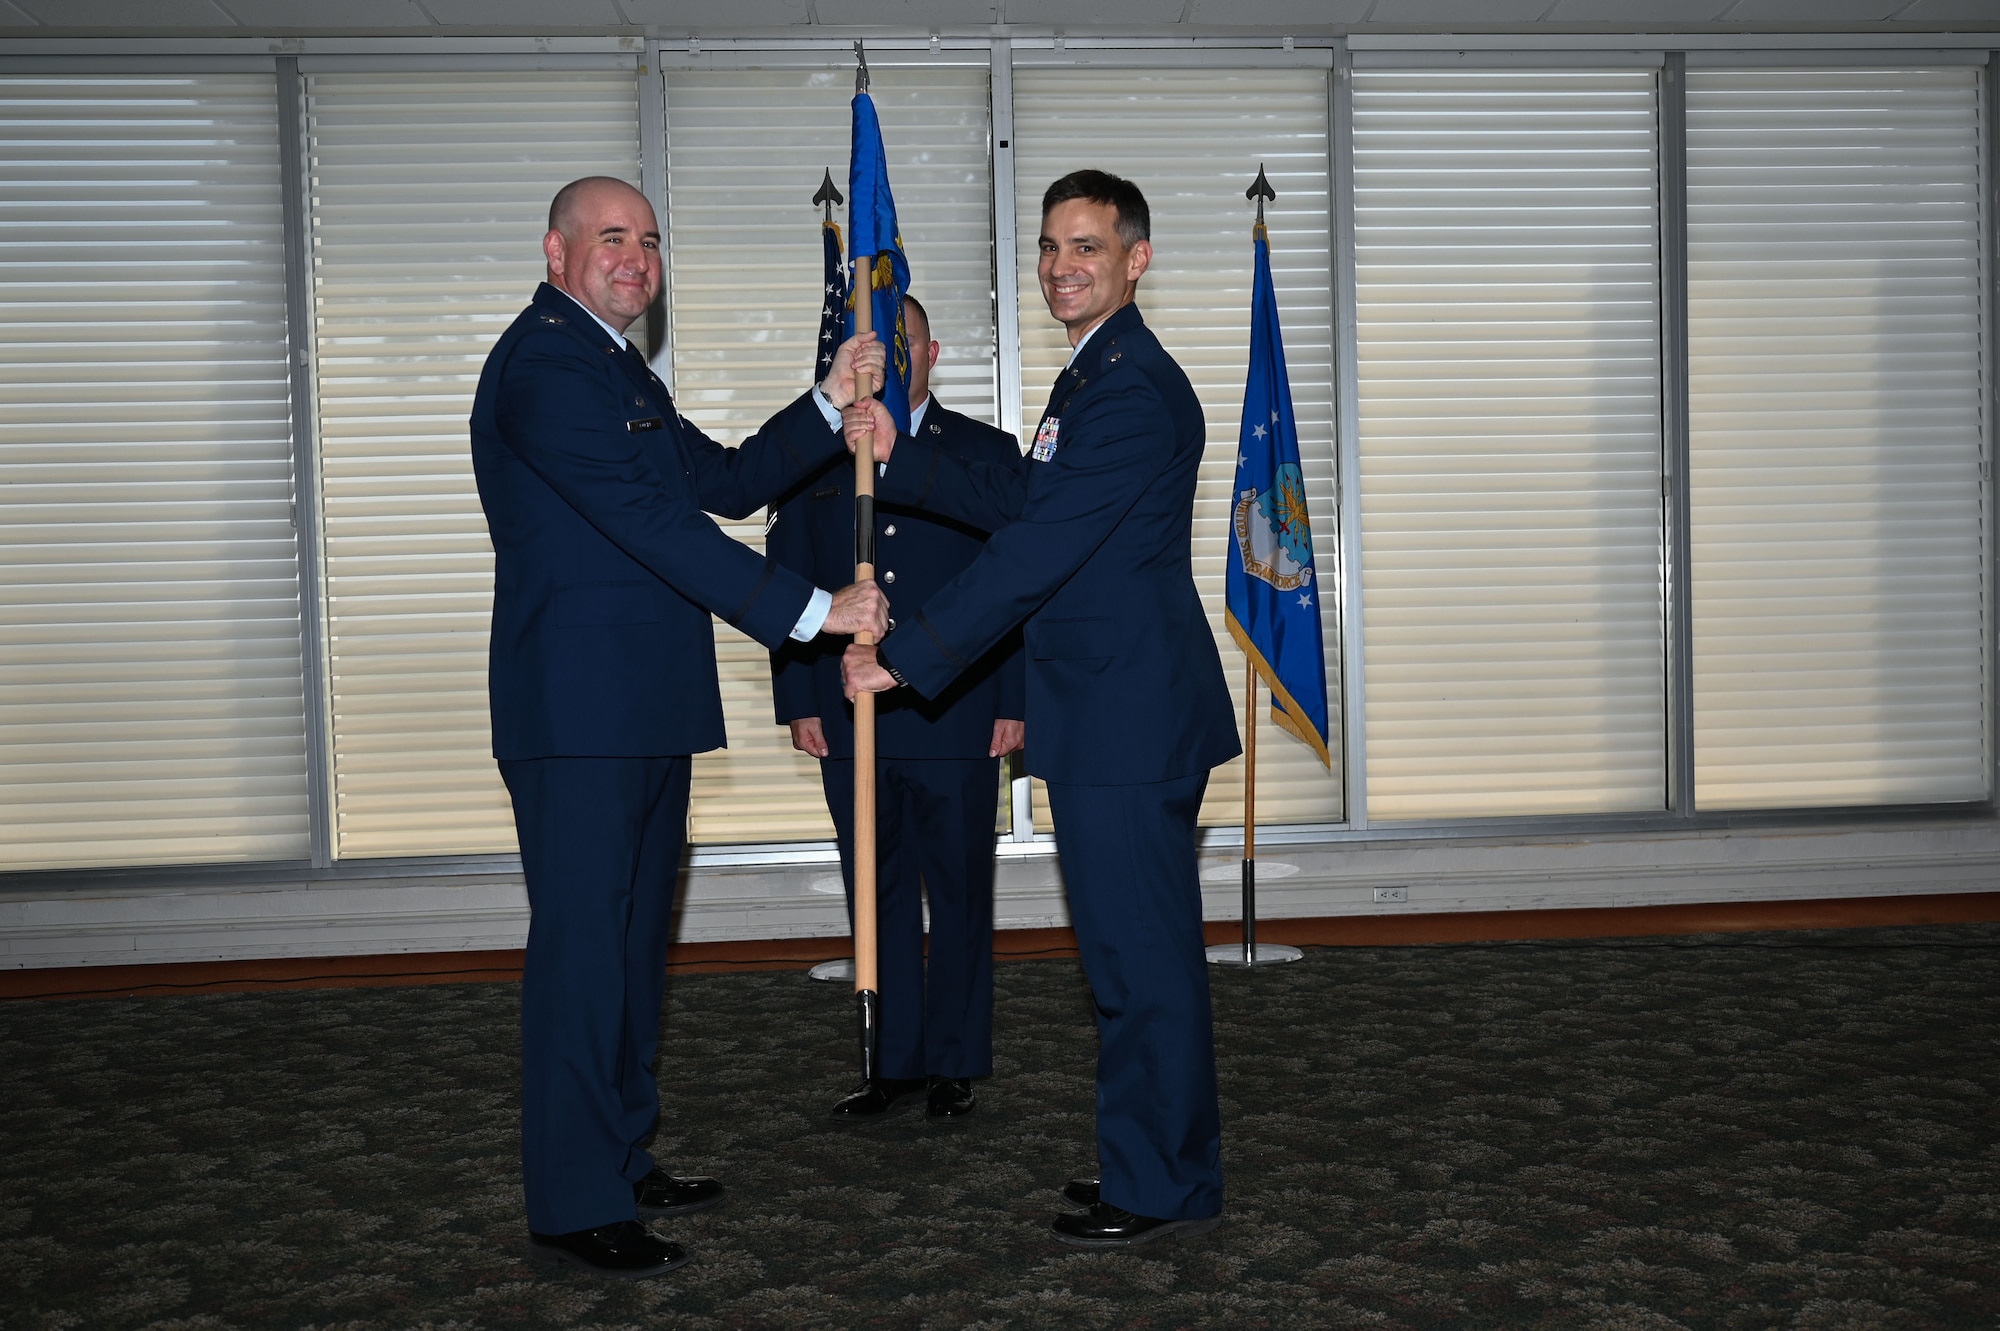 U.S. Air Force Col. Robert Cocke, 350th Spectrum Warfare Group commander, left, passes the guidon to U.S. Air Force Lt. Col. Luke Marron, 350th Spectrum Warfare Group, Detachment 1 assuming commander, right, at Eglin Air Force Base, Aug. 25, 2023. The 350th SWG, Det 1 will enhance the Combat Air Force’s survivability in the electromagnetic spectrum while accomplishing function and theater-specific Combatant Commander assigned missions. (U.S. Air Force photo by Staff Sgt. Ericka A. Woolever)